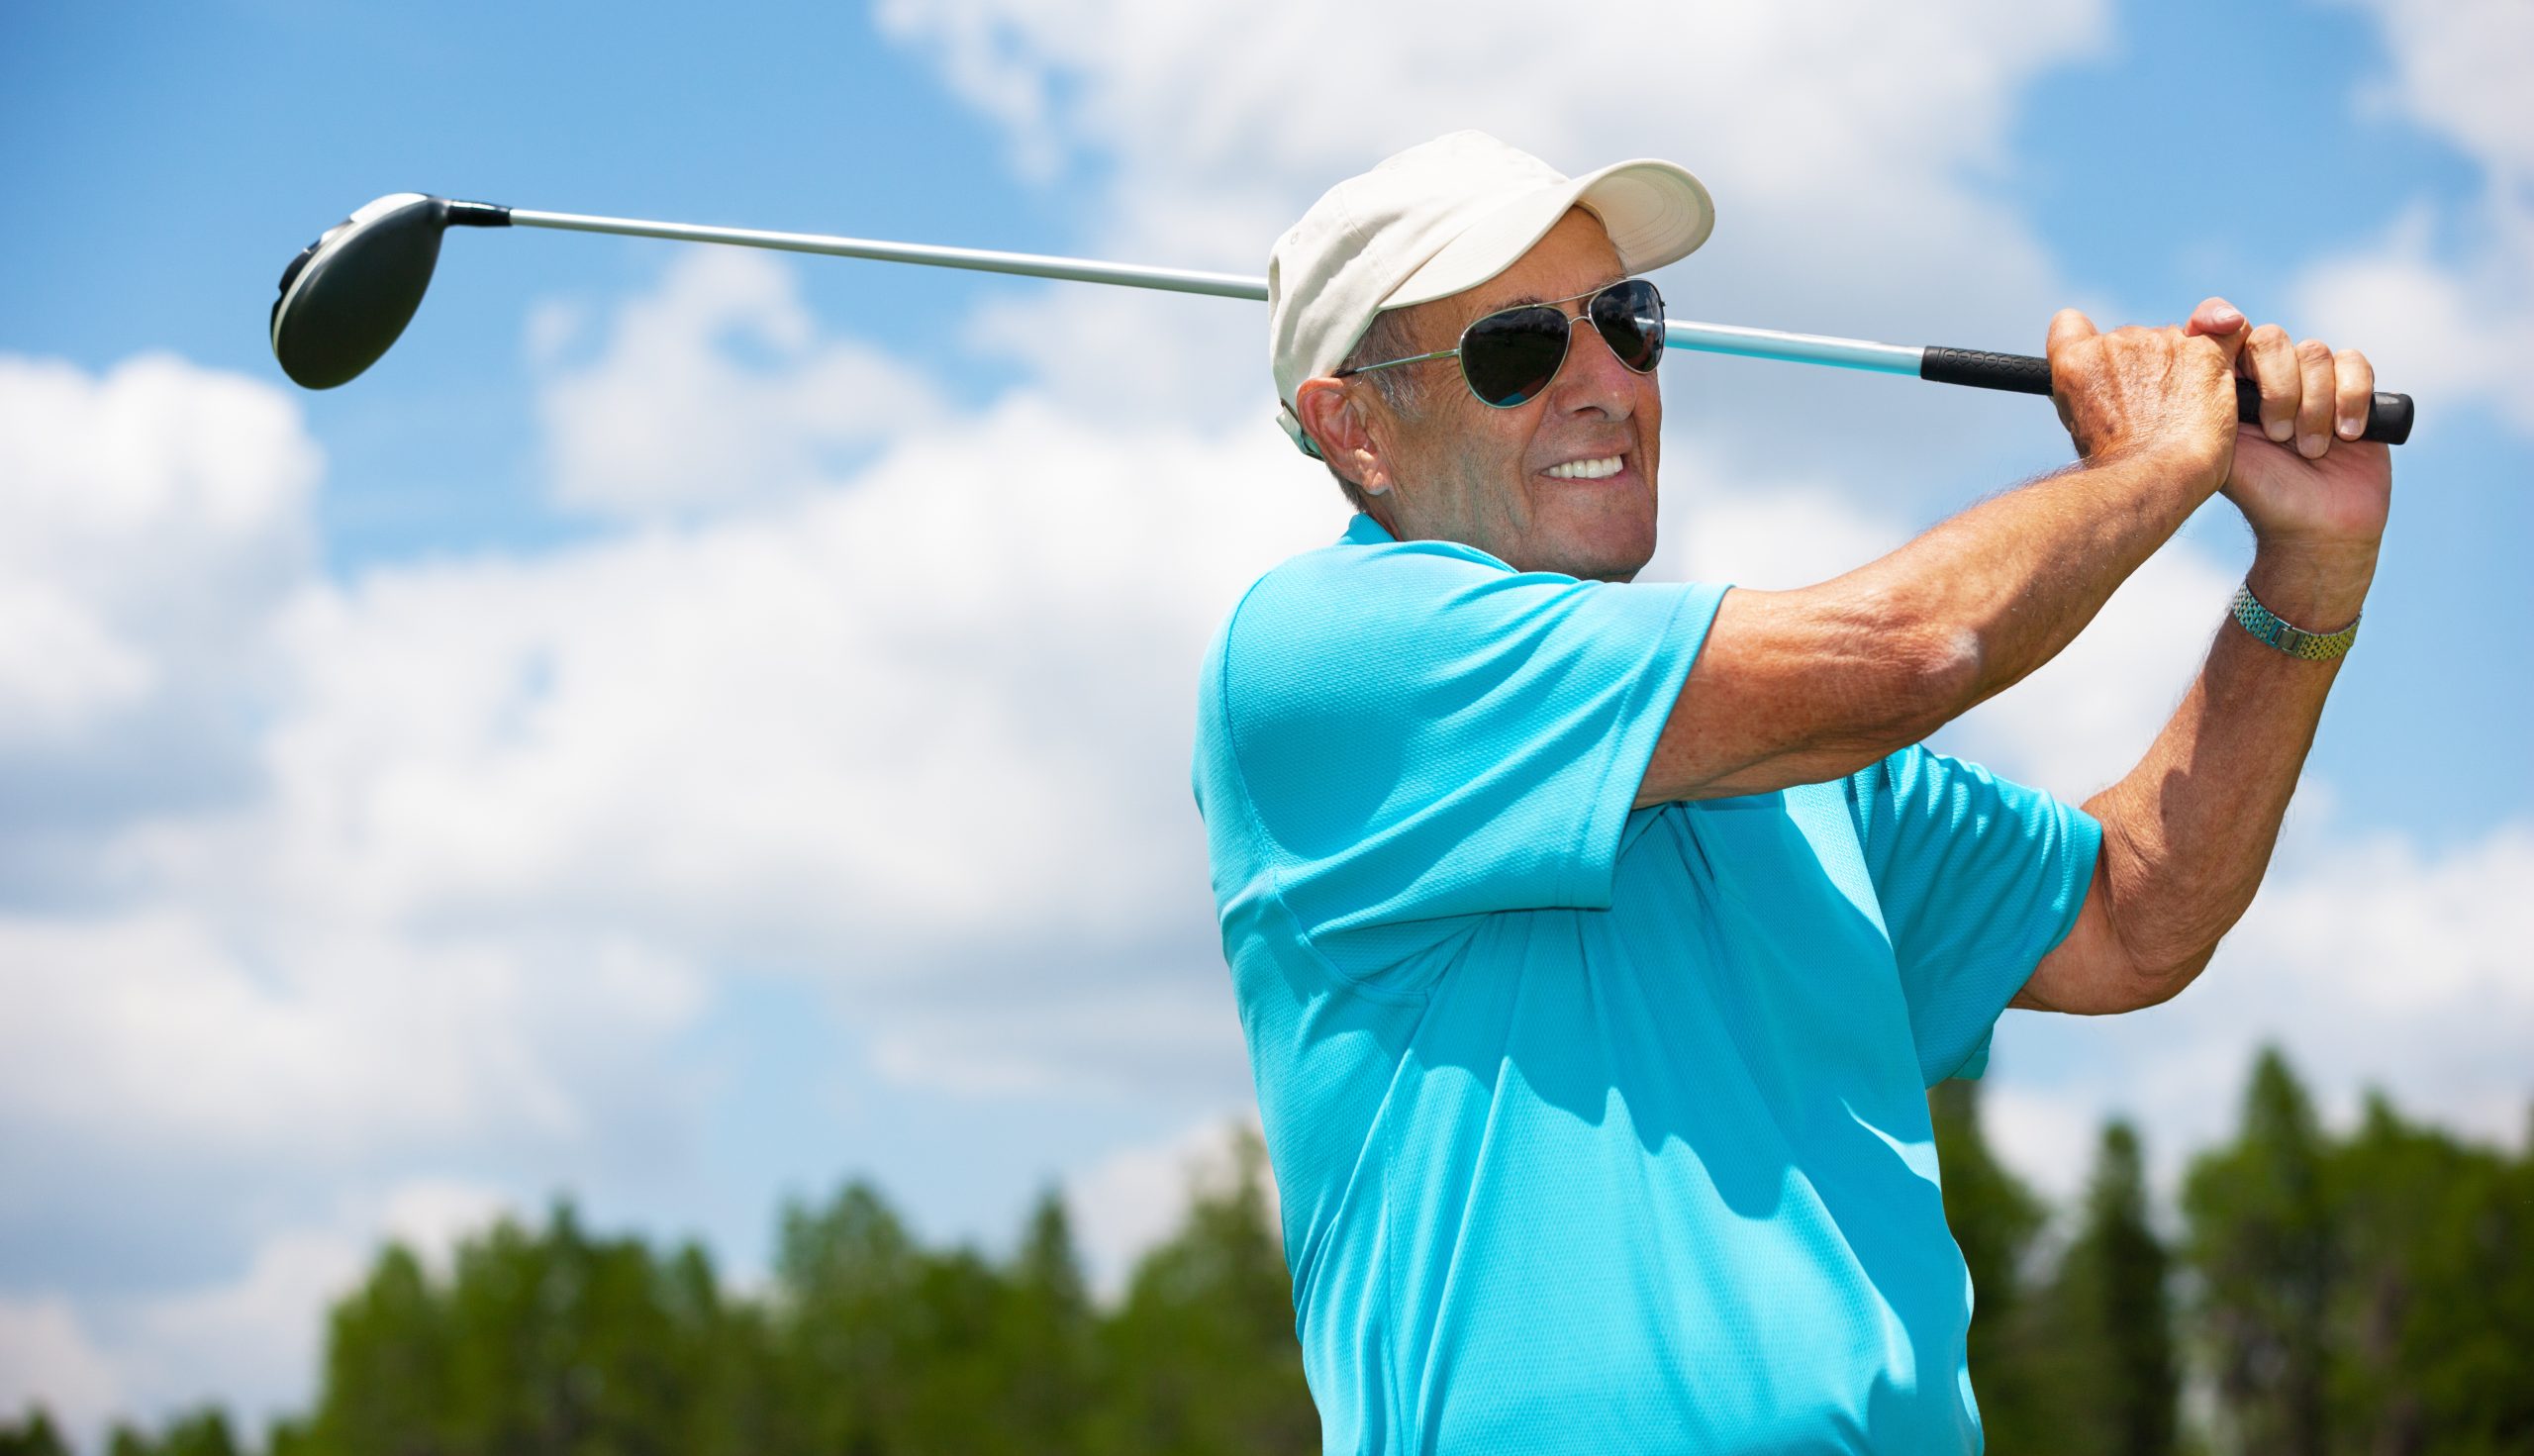 active elderly man playing golf with sunglasses